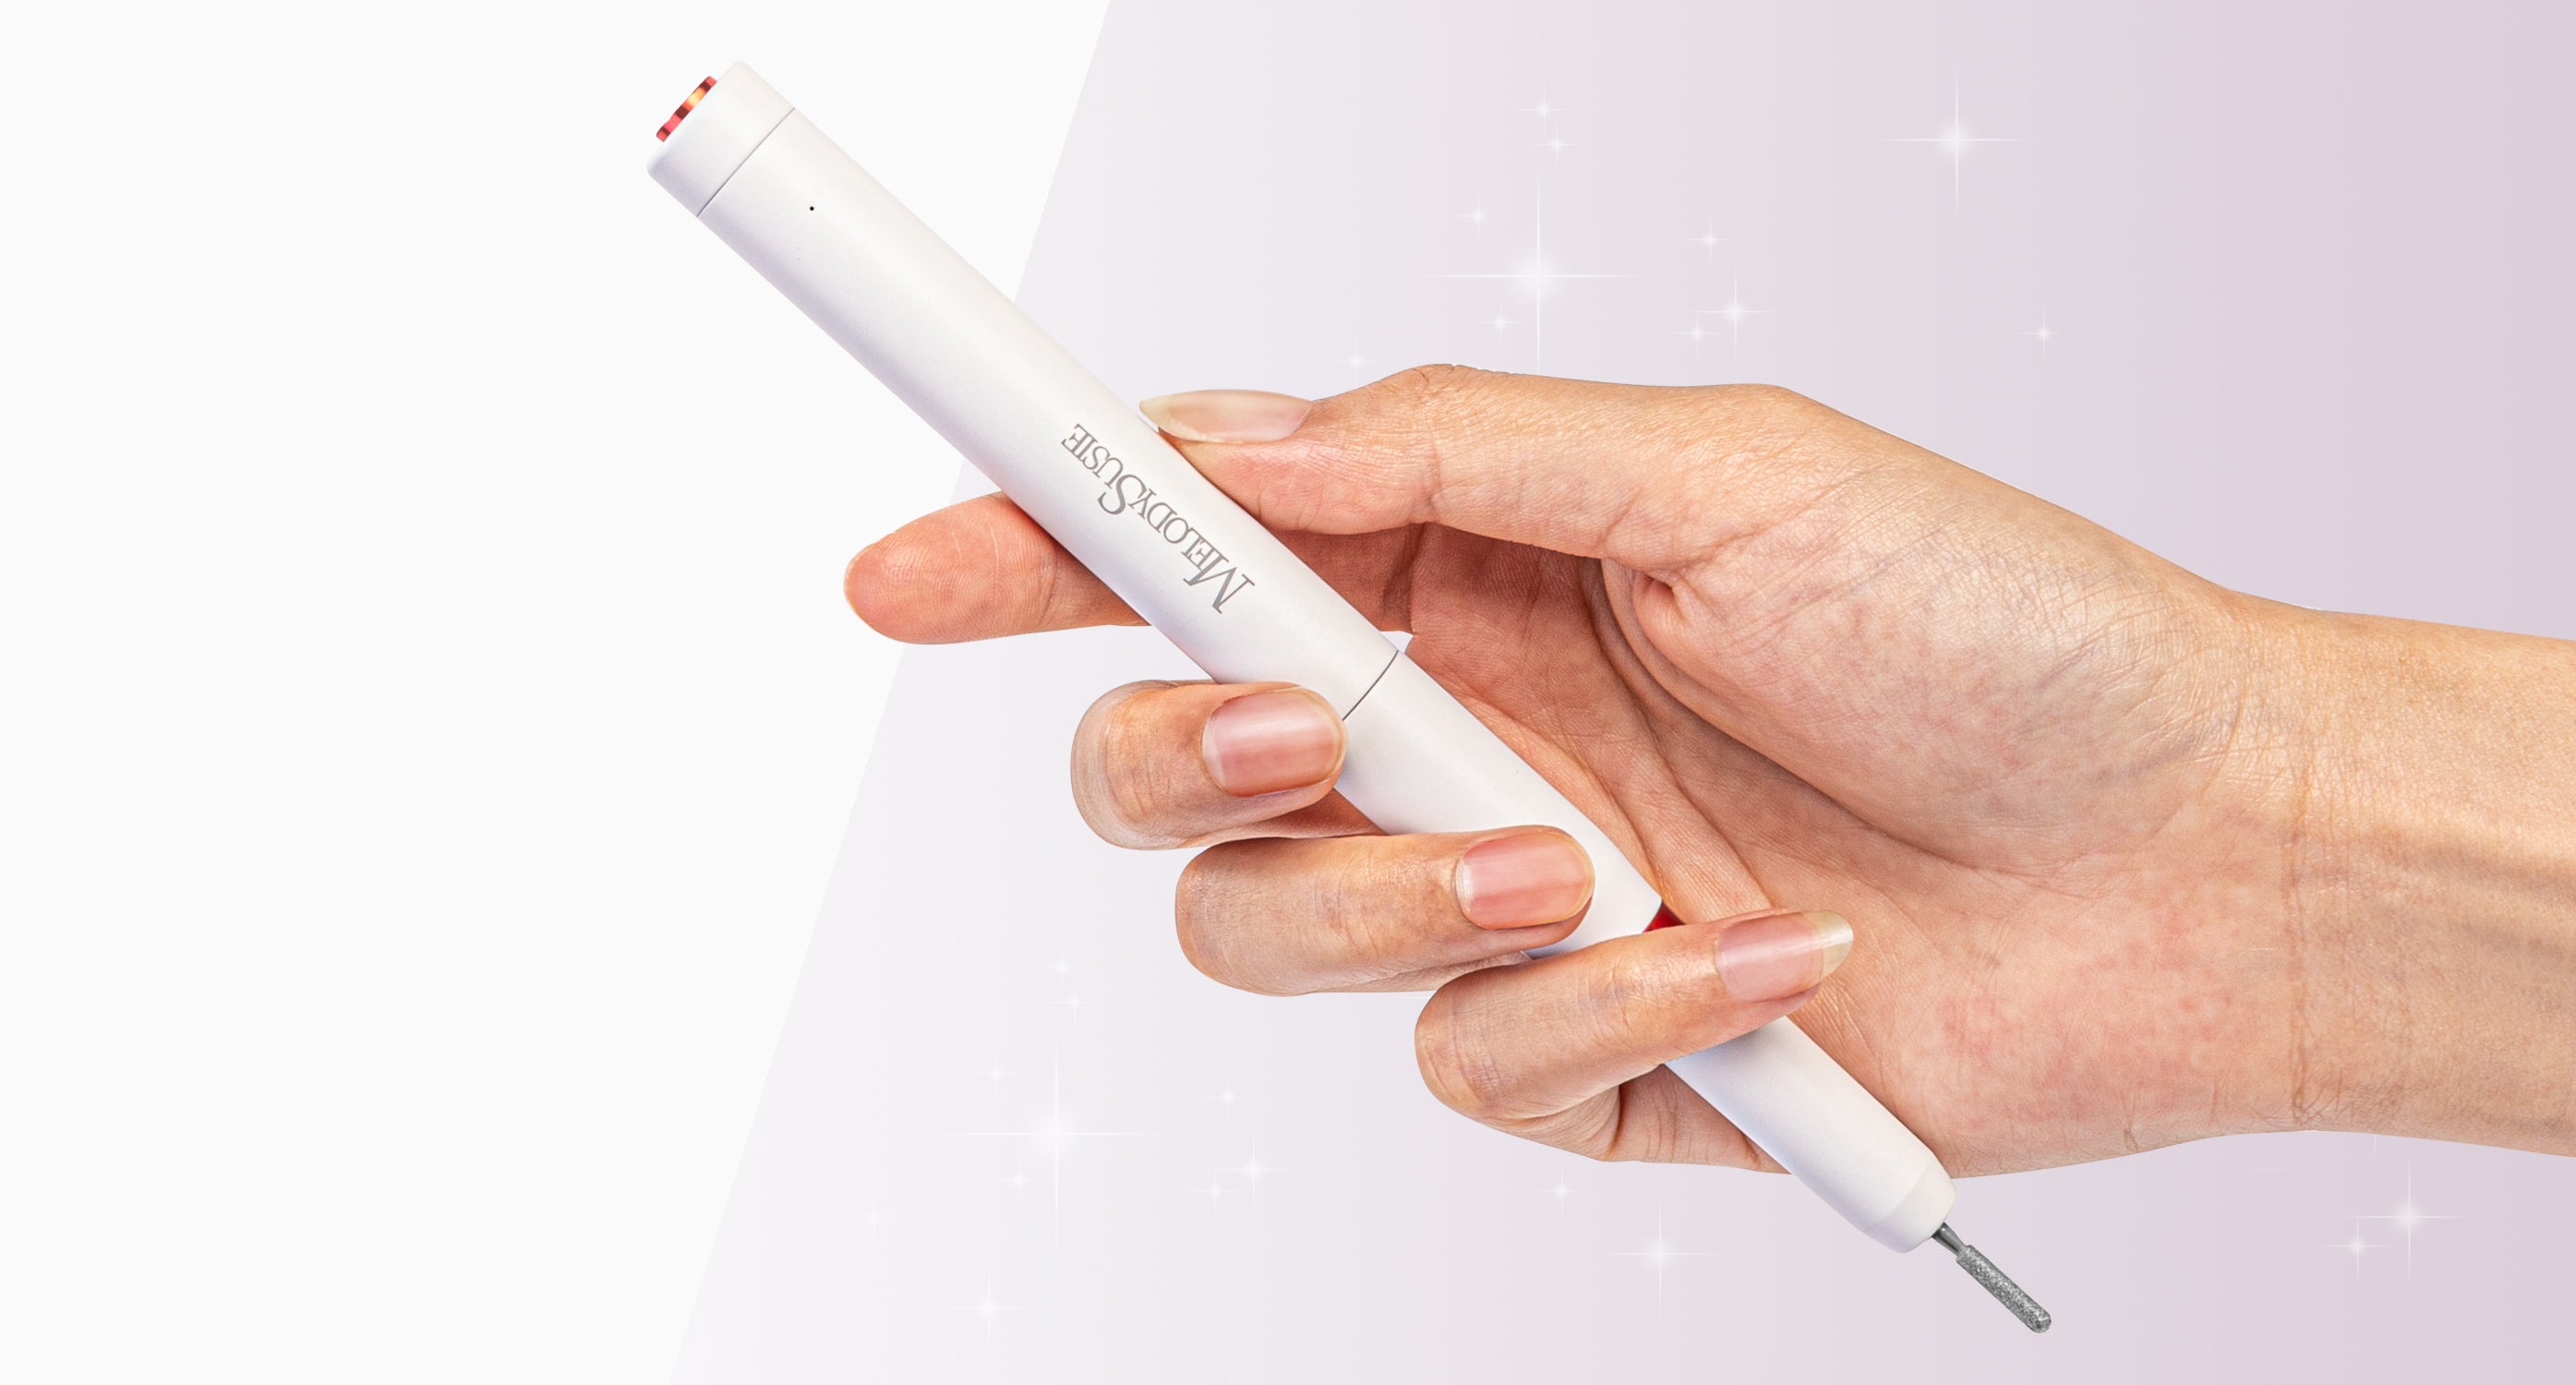 Nail Care Made Effortless: Meet the MelodySusie 1st Generation Nail Drill Pen PM150E